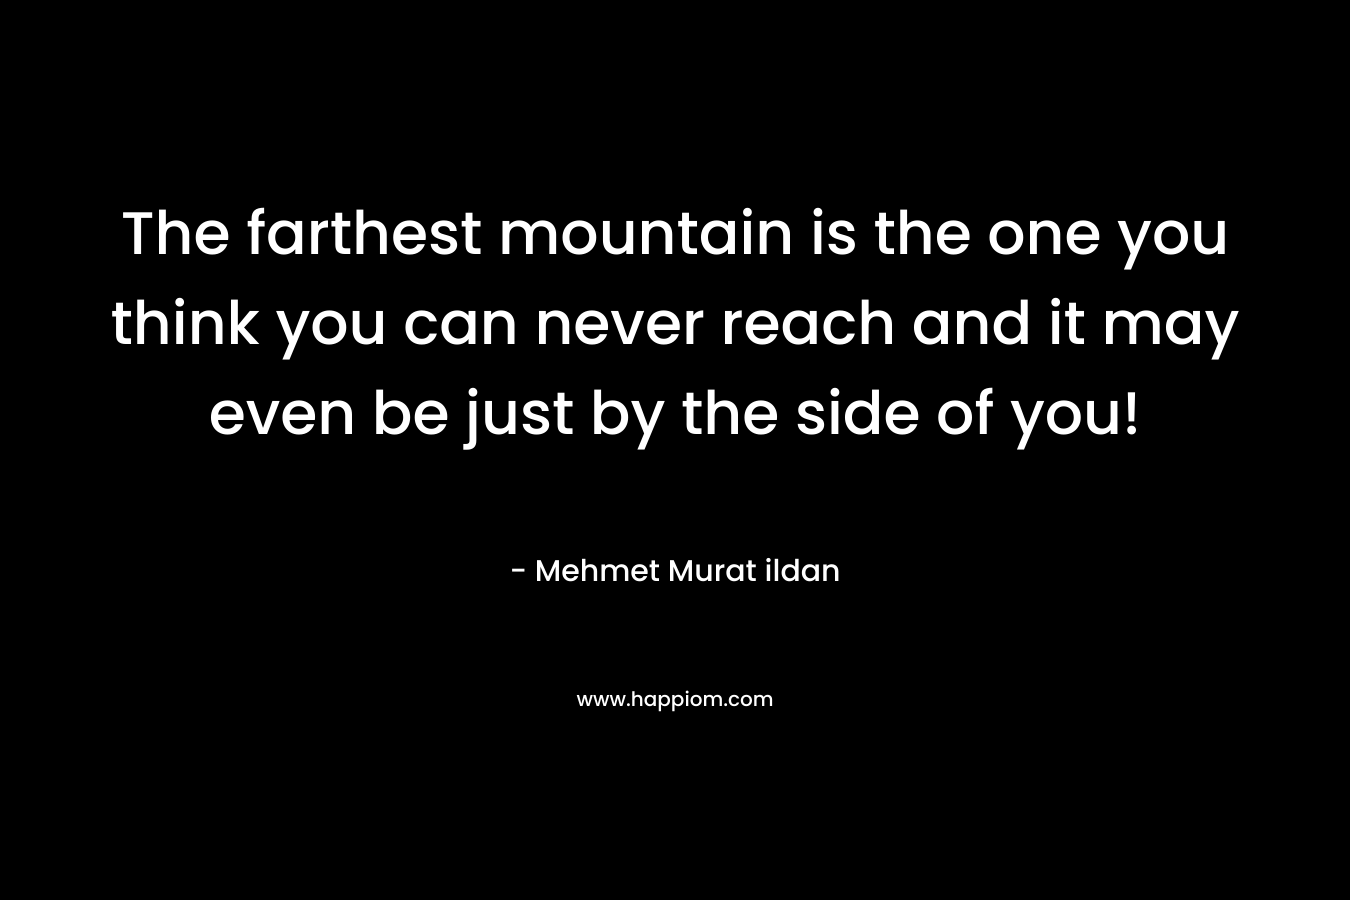 The farthest mountain is the one you think you can never reach and it may even be just by the side of you! – Mehmet Murat ildan